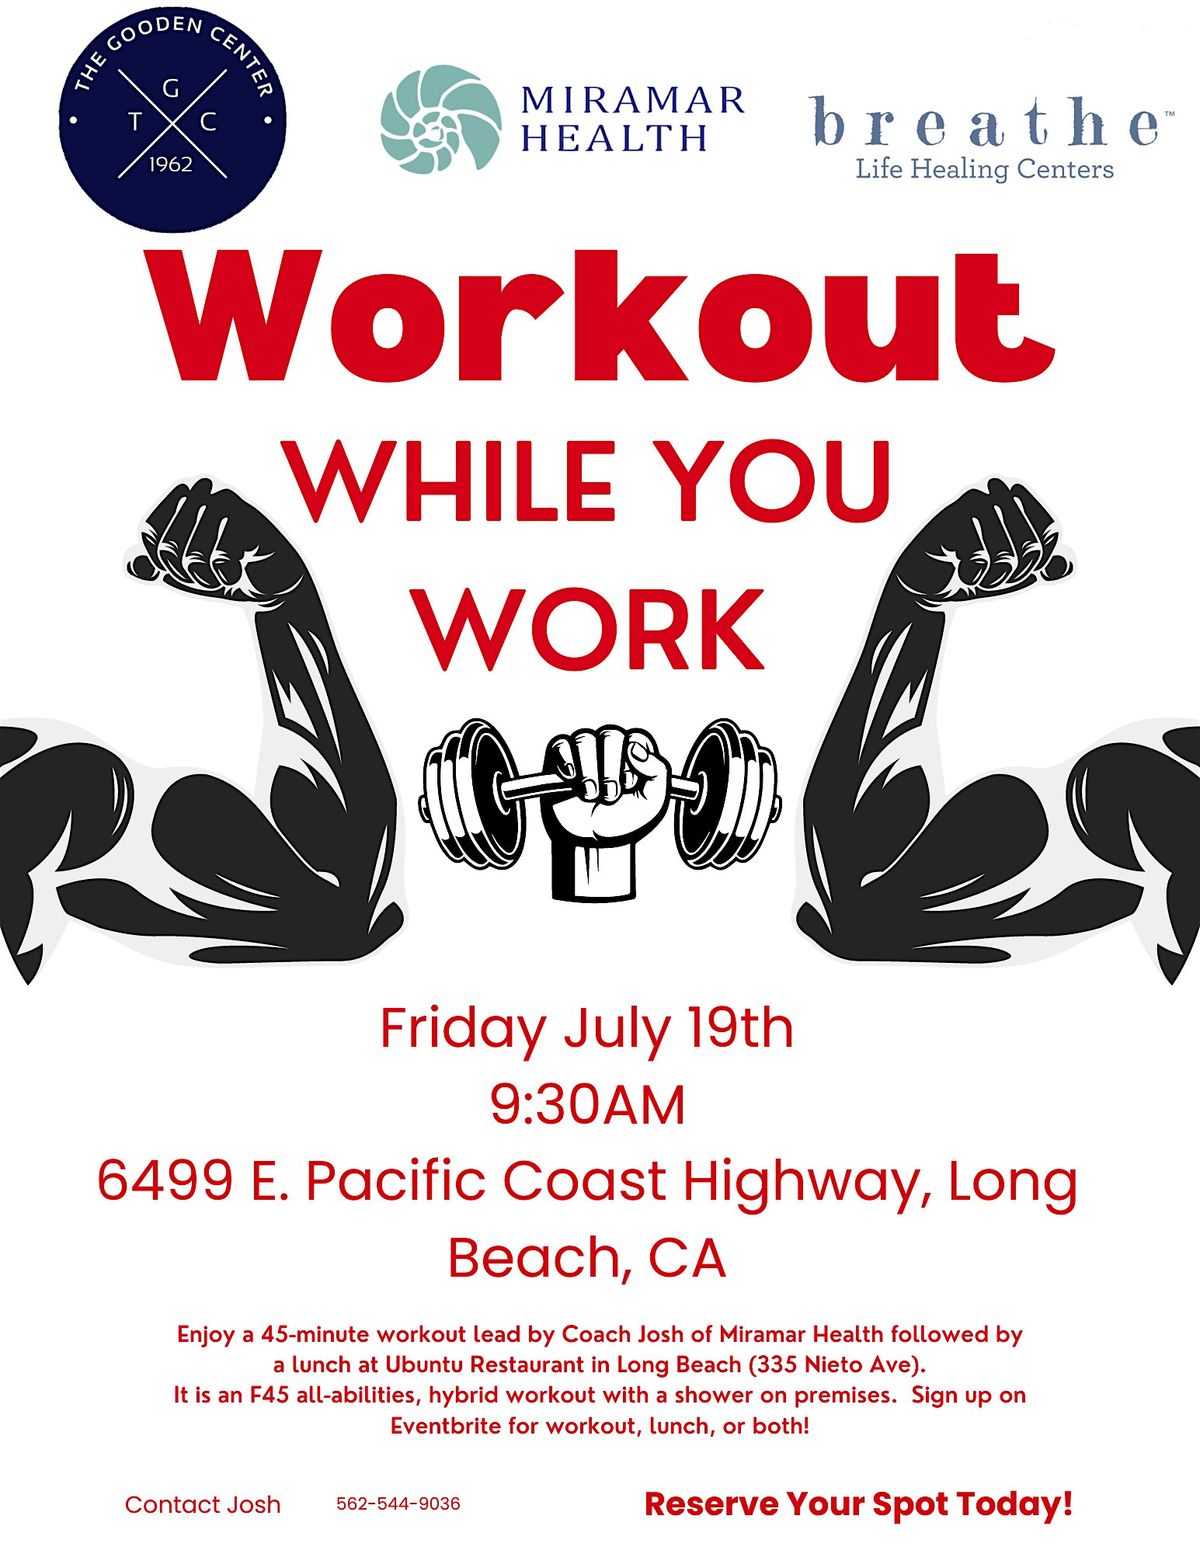 Workout While you Work Networking Event